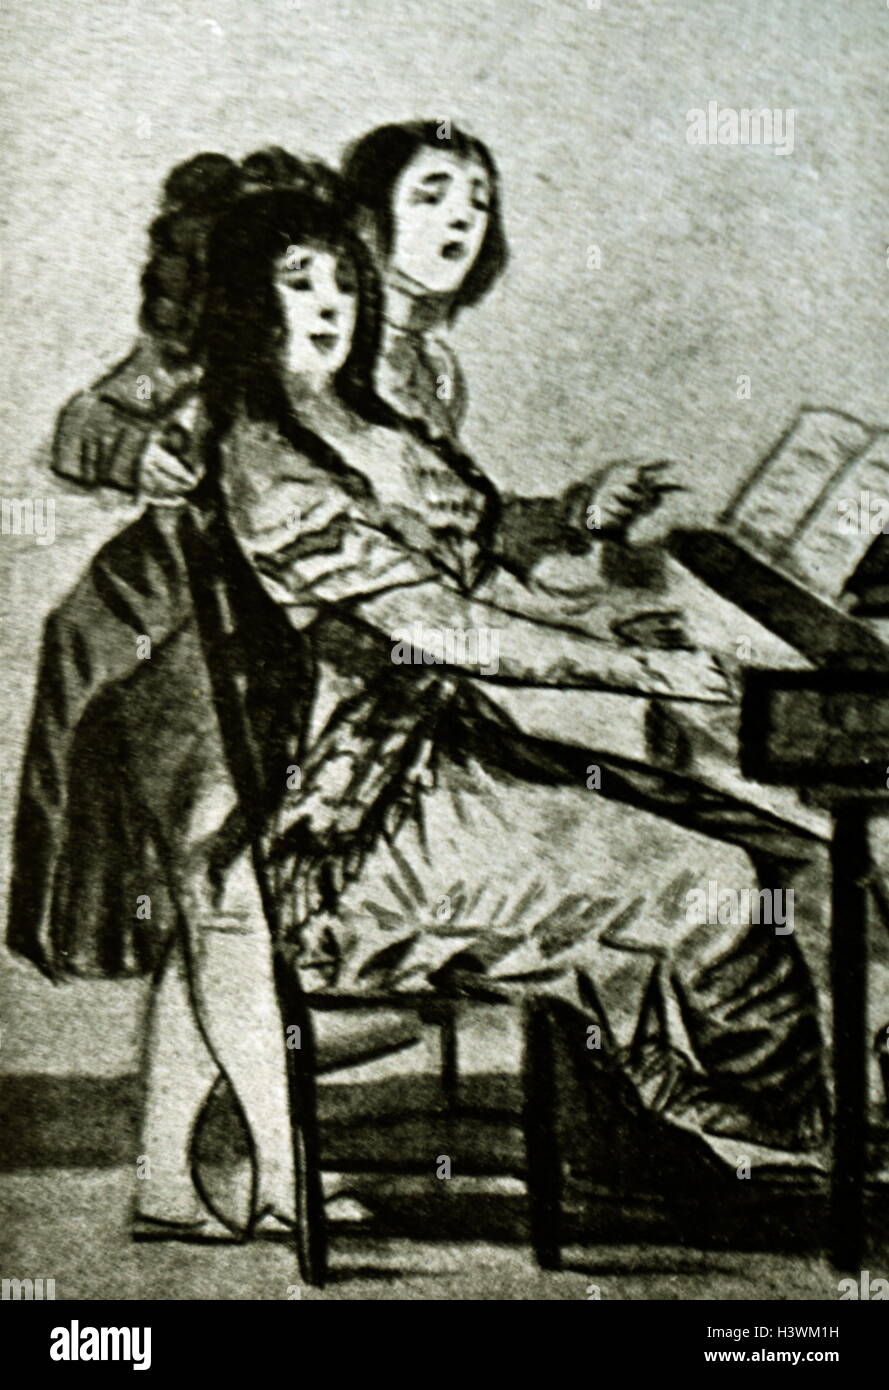 Charcoal sketch of a woman playing a piano by Francisco Jose de Goya y Lucientes (1746-1828) a Spanish romantic painter and printmaker. Dated 19th Century Stock Photo